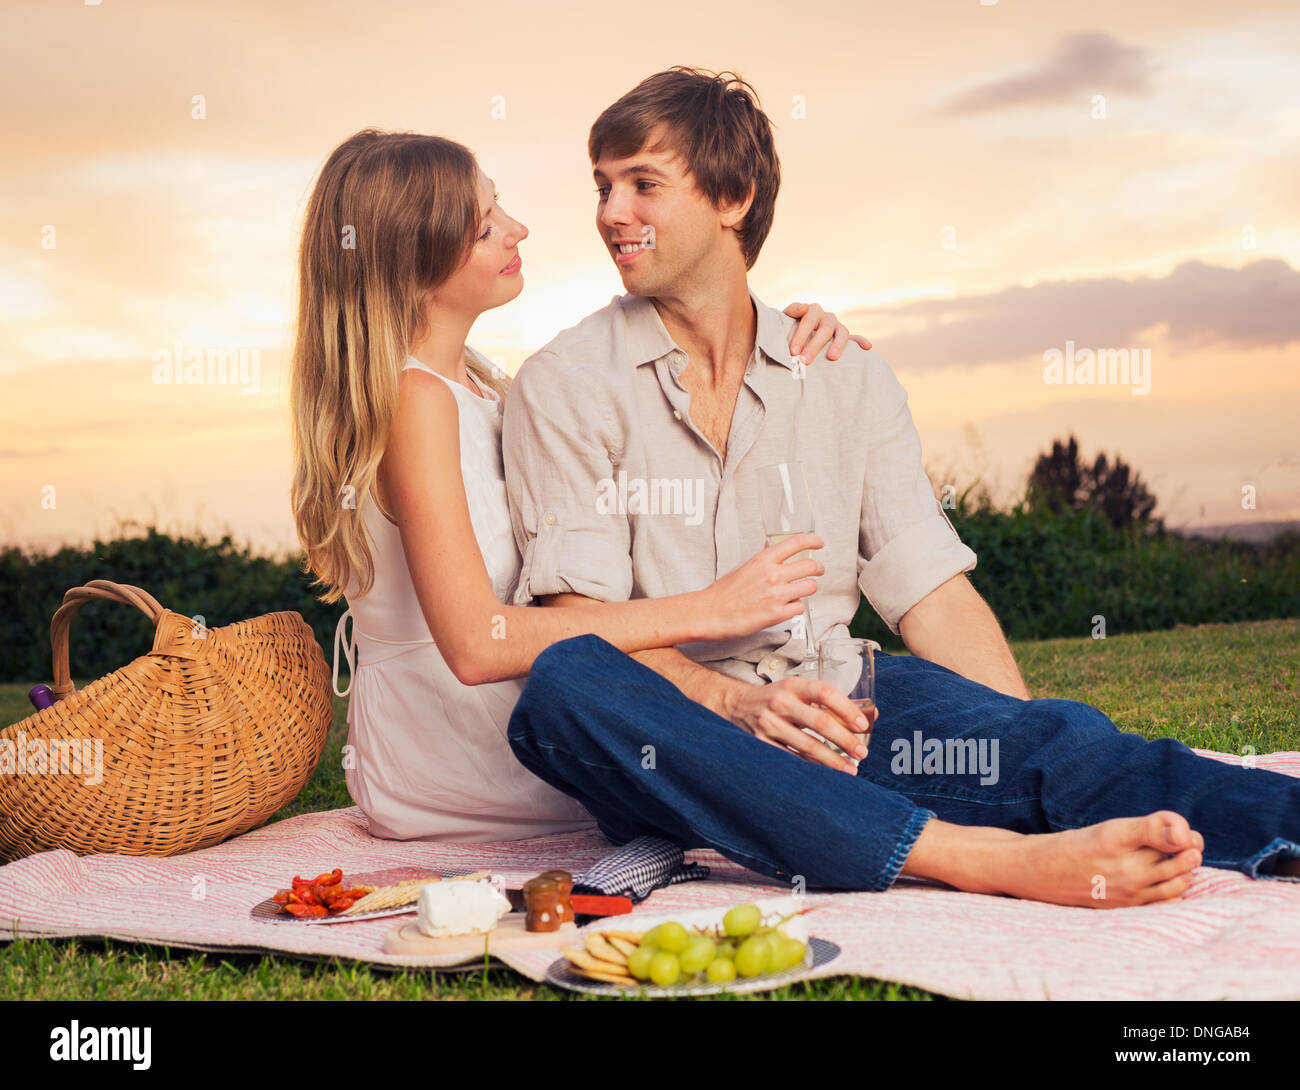 Attractive couple on romantic sunset picnic in countryside Stock Photo